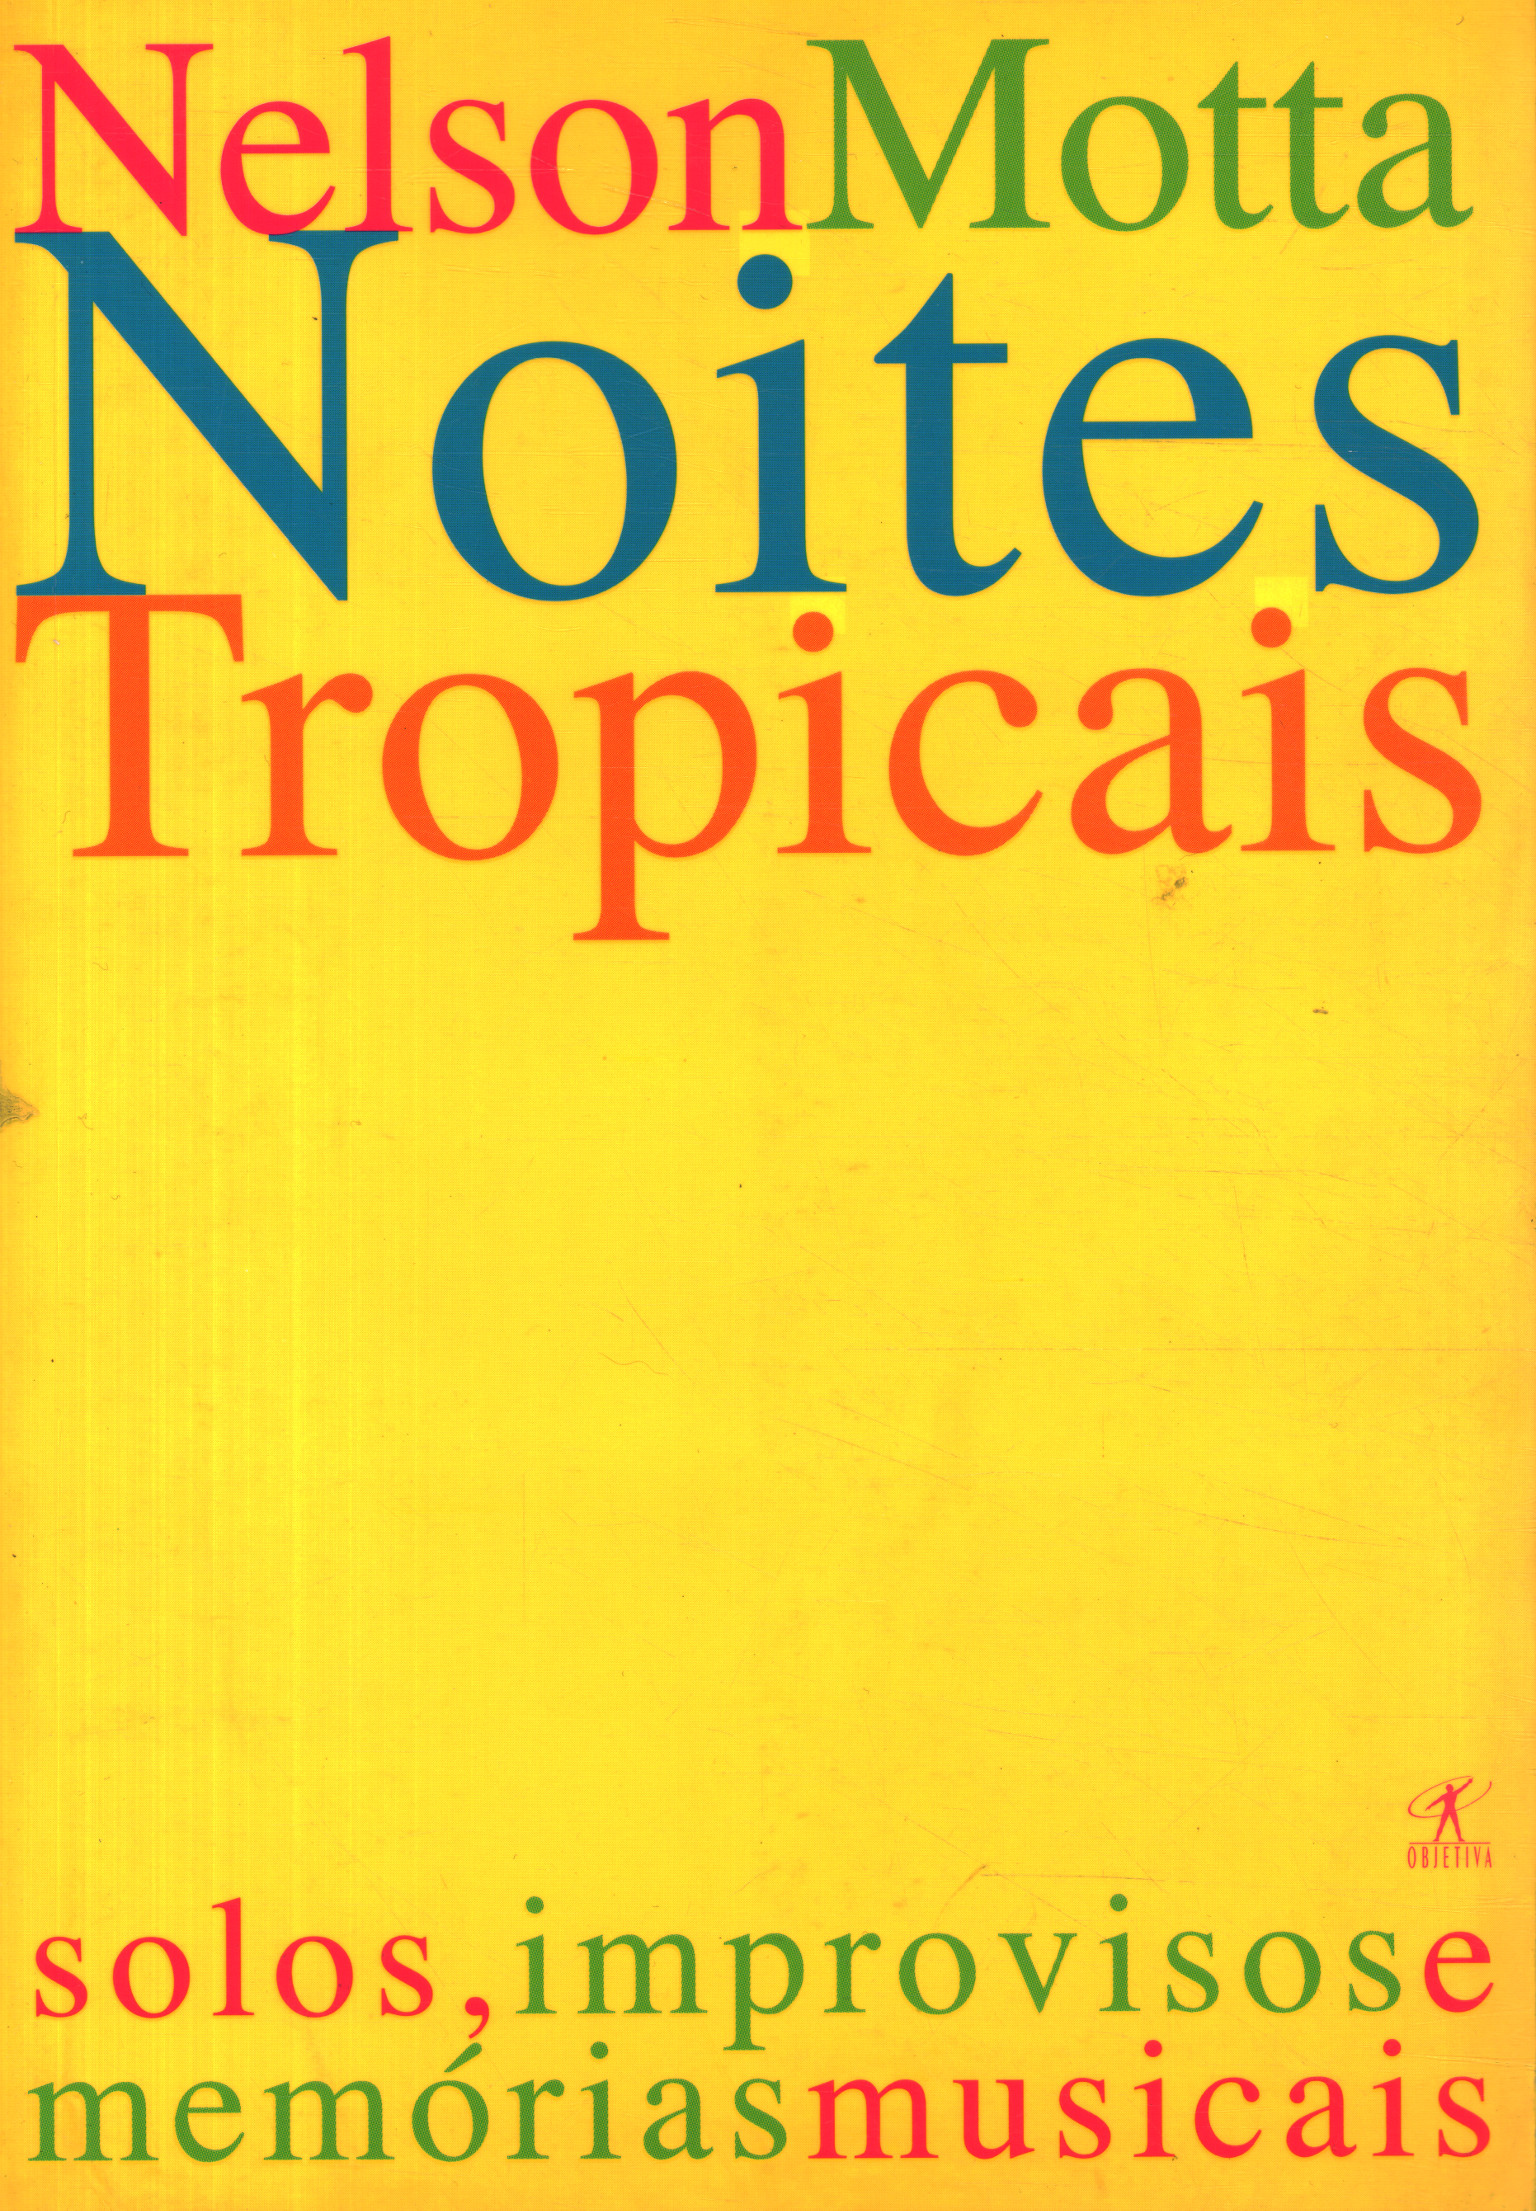 Noches tropicales